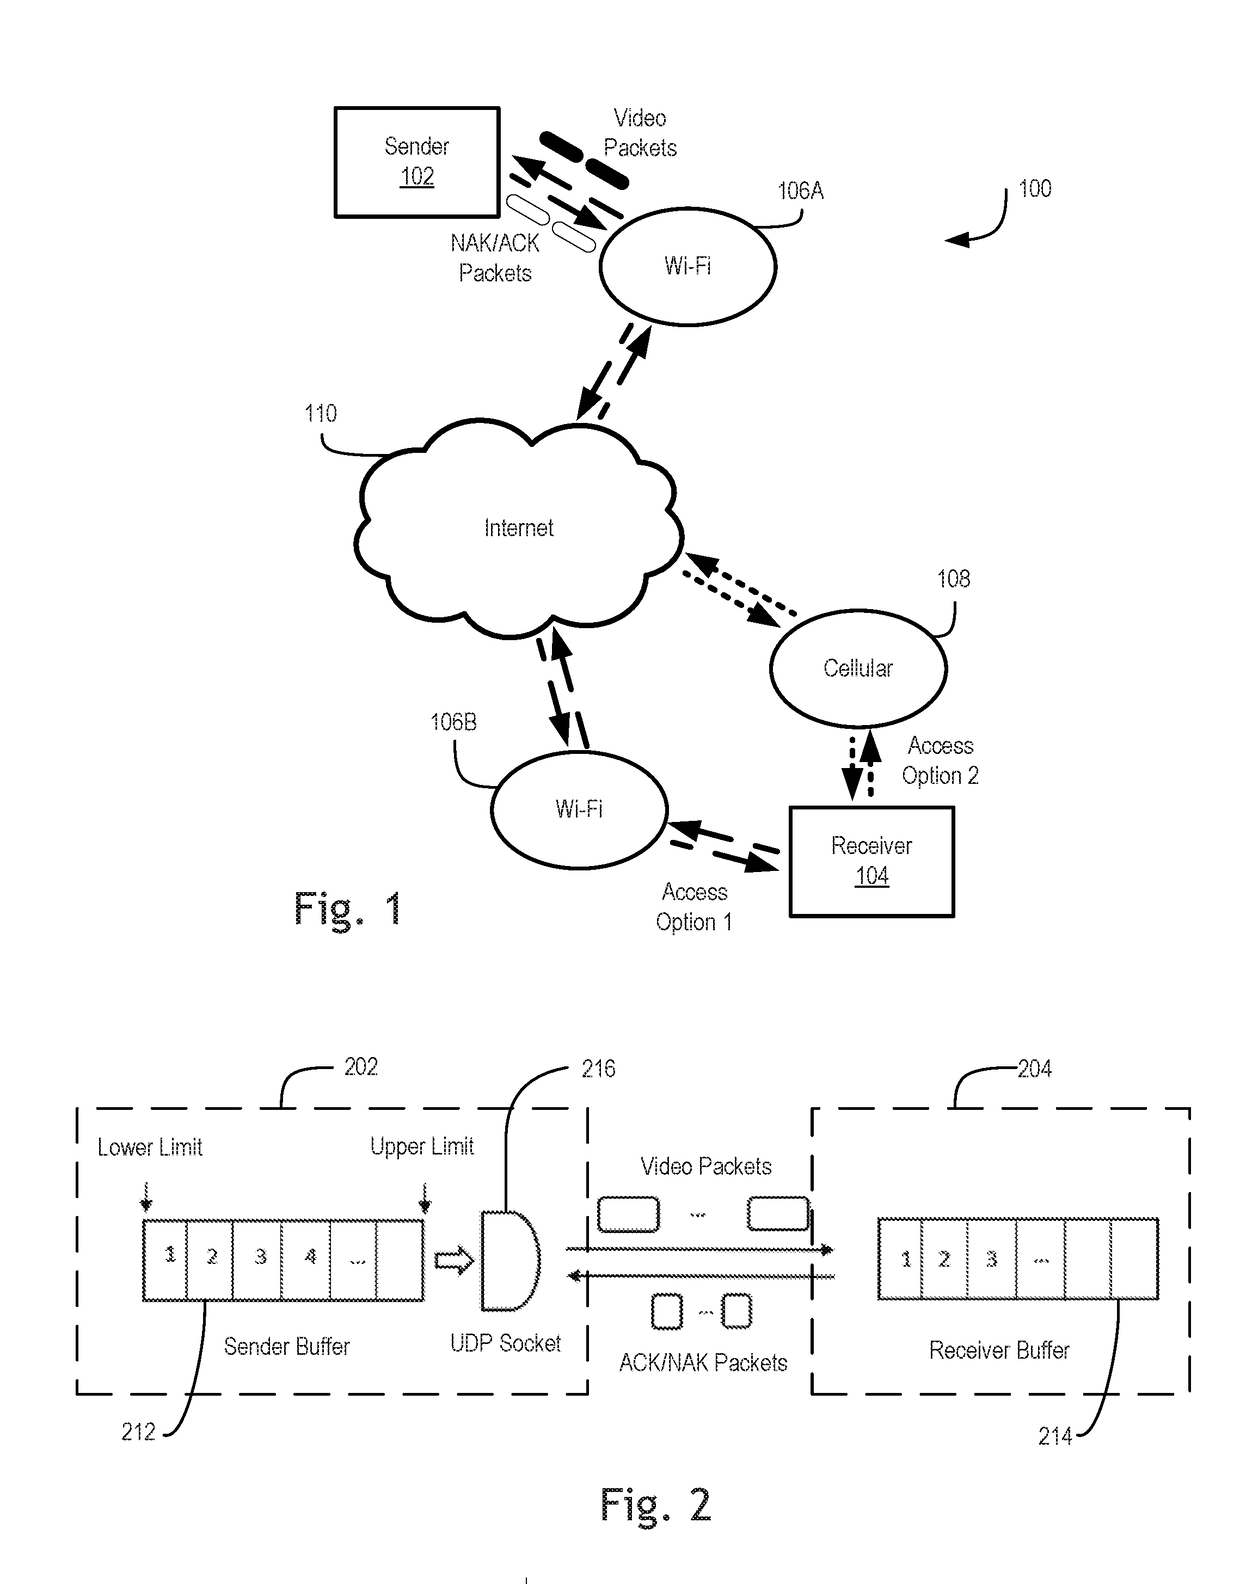 Buffer-aware transmission rate control for real-time video streaming system